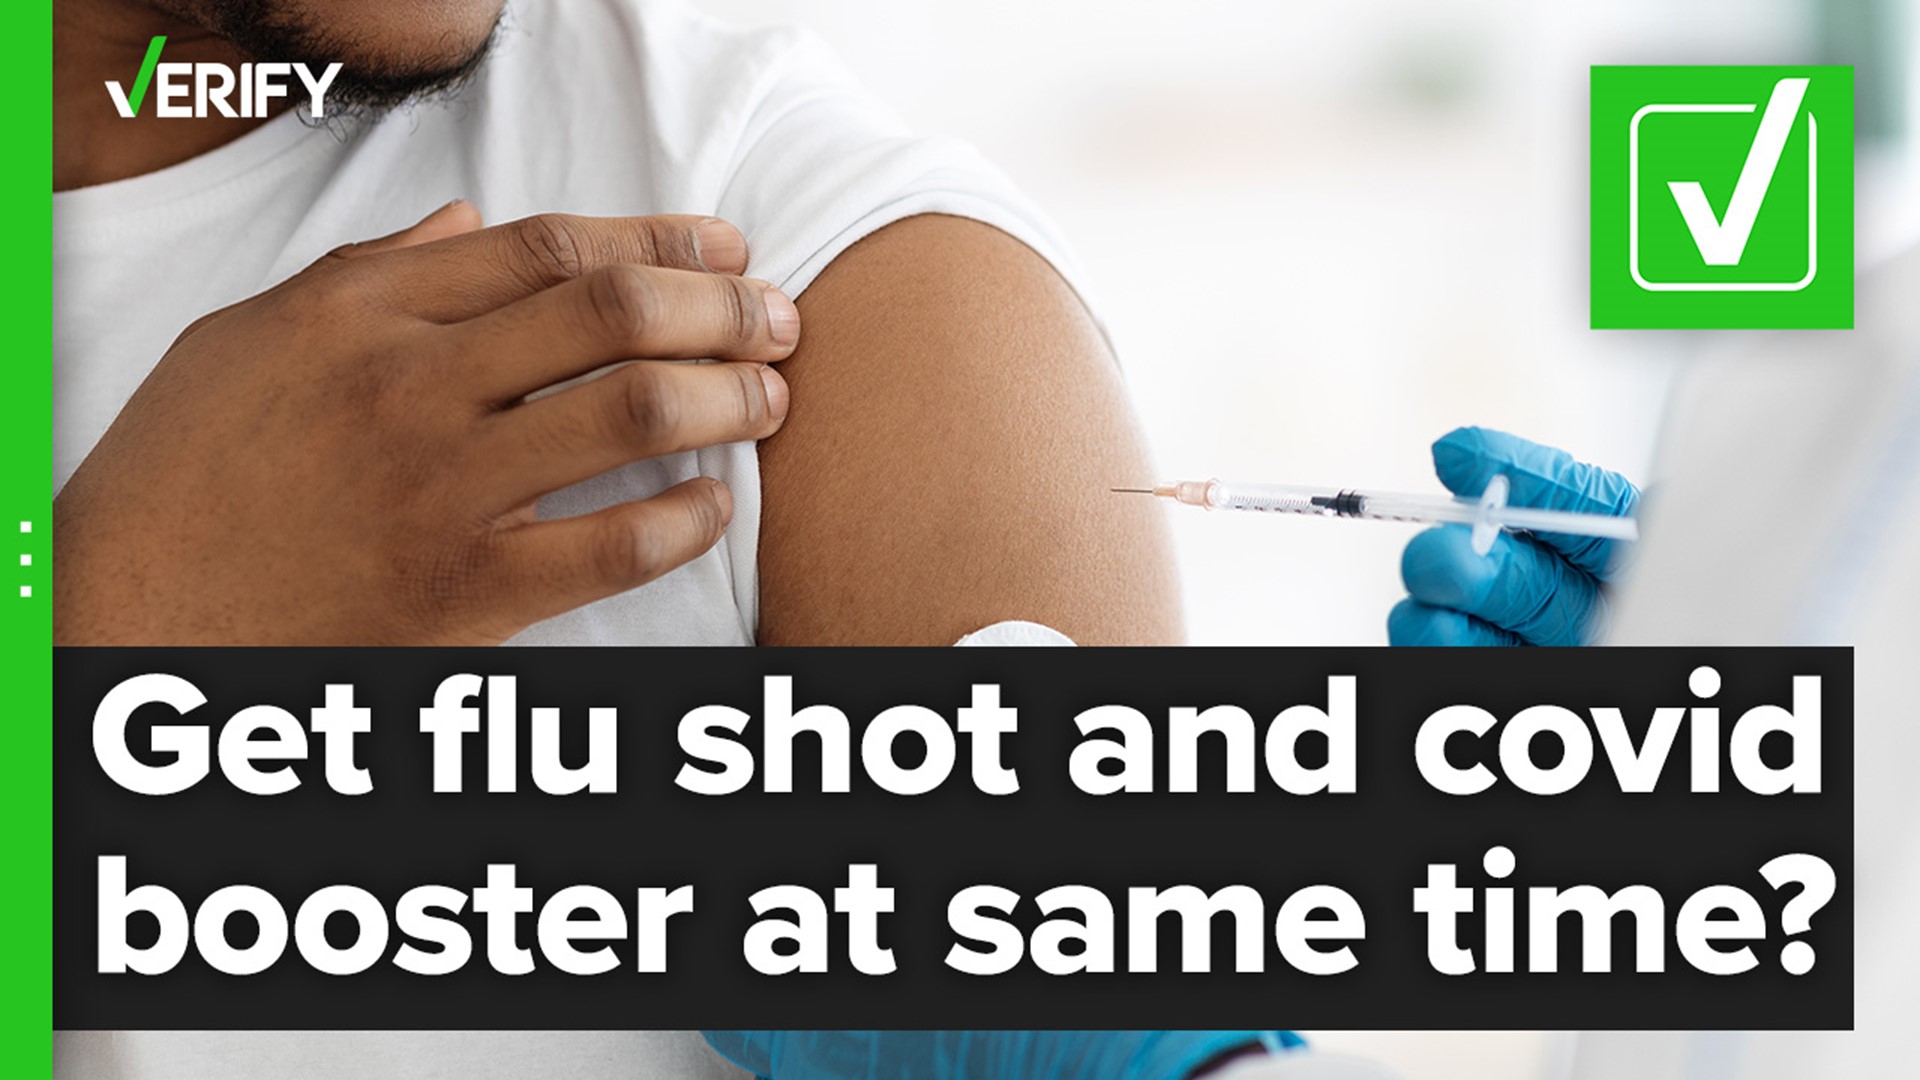 As flu season quickly approaches, the CDC and other medical experts say it’s safe to get your flu shot and omicron COVID-19 booster at the same time.